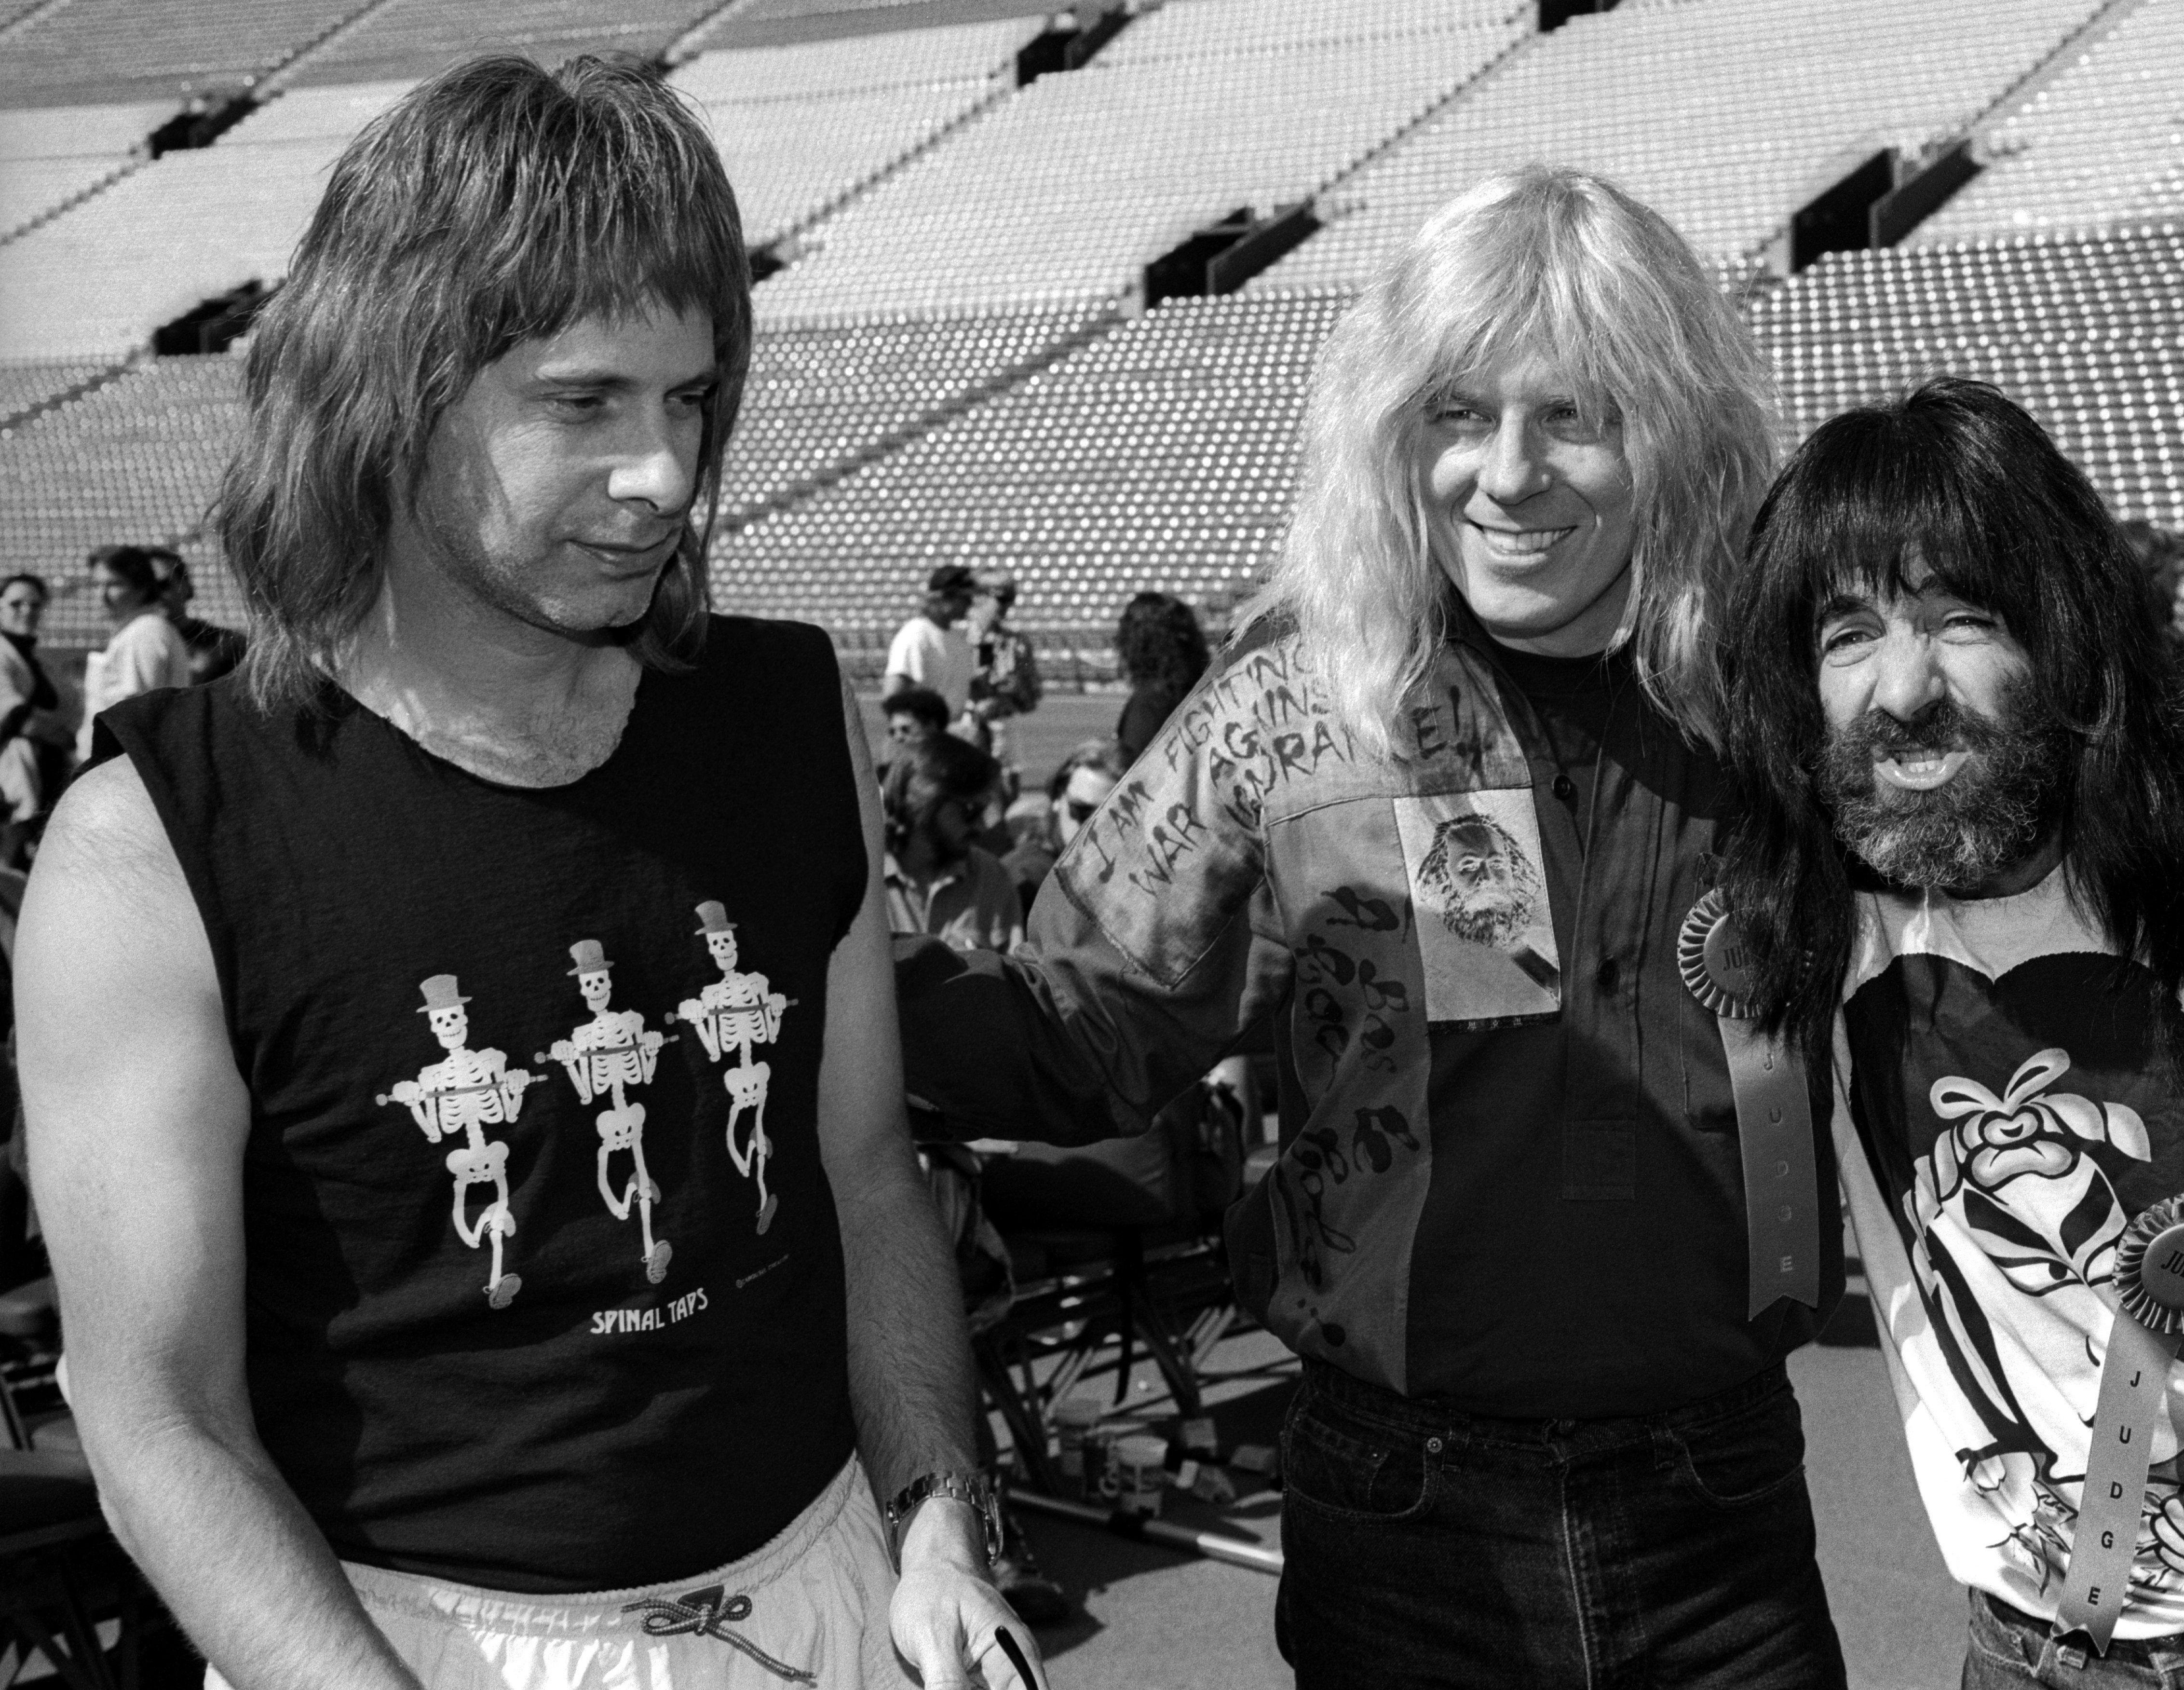 Christopher Guest, Michael McKean and Harry Shearer of the spoof band Spinal Tap pose for portrait in Los Angeles, California, October 31, 1991 | Source: Getty Images